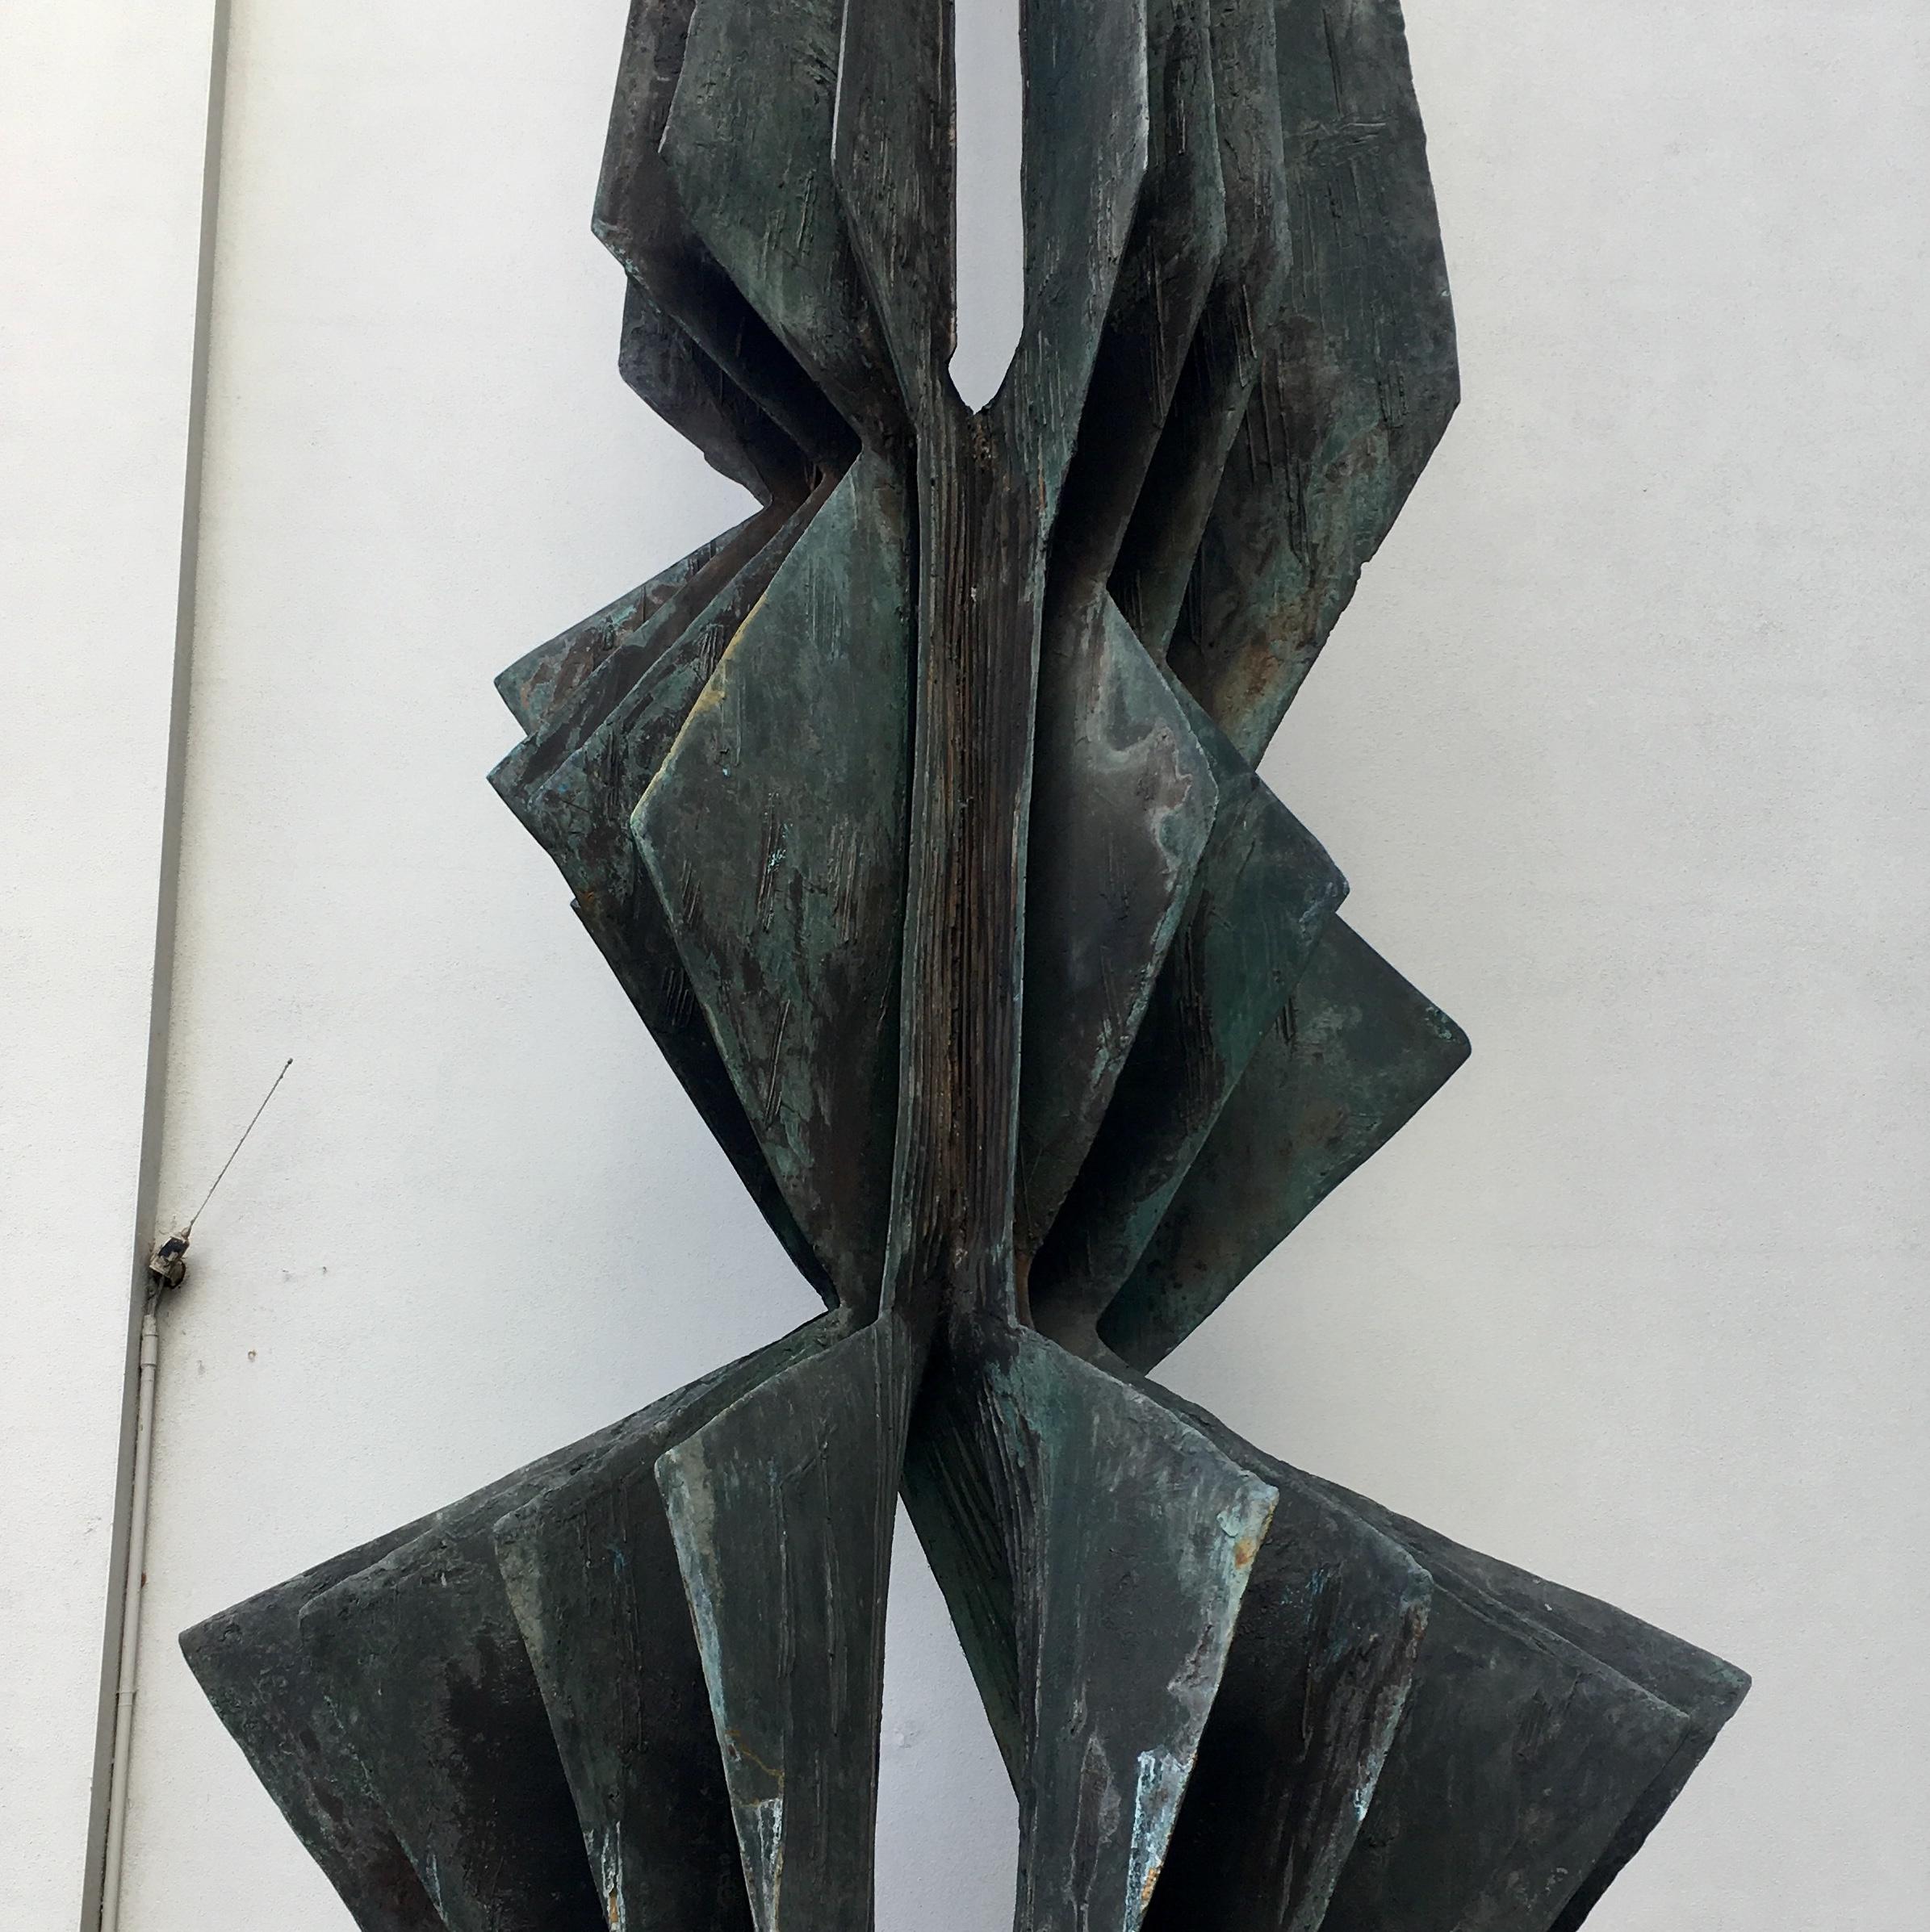 A monumental bronze sculpture titled 'Grande Tensione Verticale' signed Toni Fabris and dated '1960 1 of 1' making this a unique sculpture.

This magnificent sculpture was originally purchased directly from the artist by Senator Fontana in